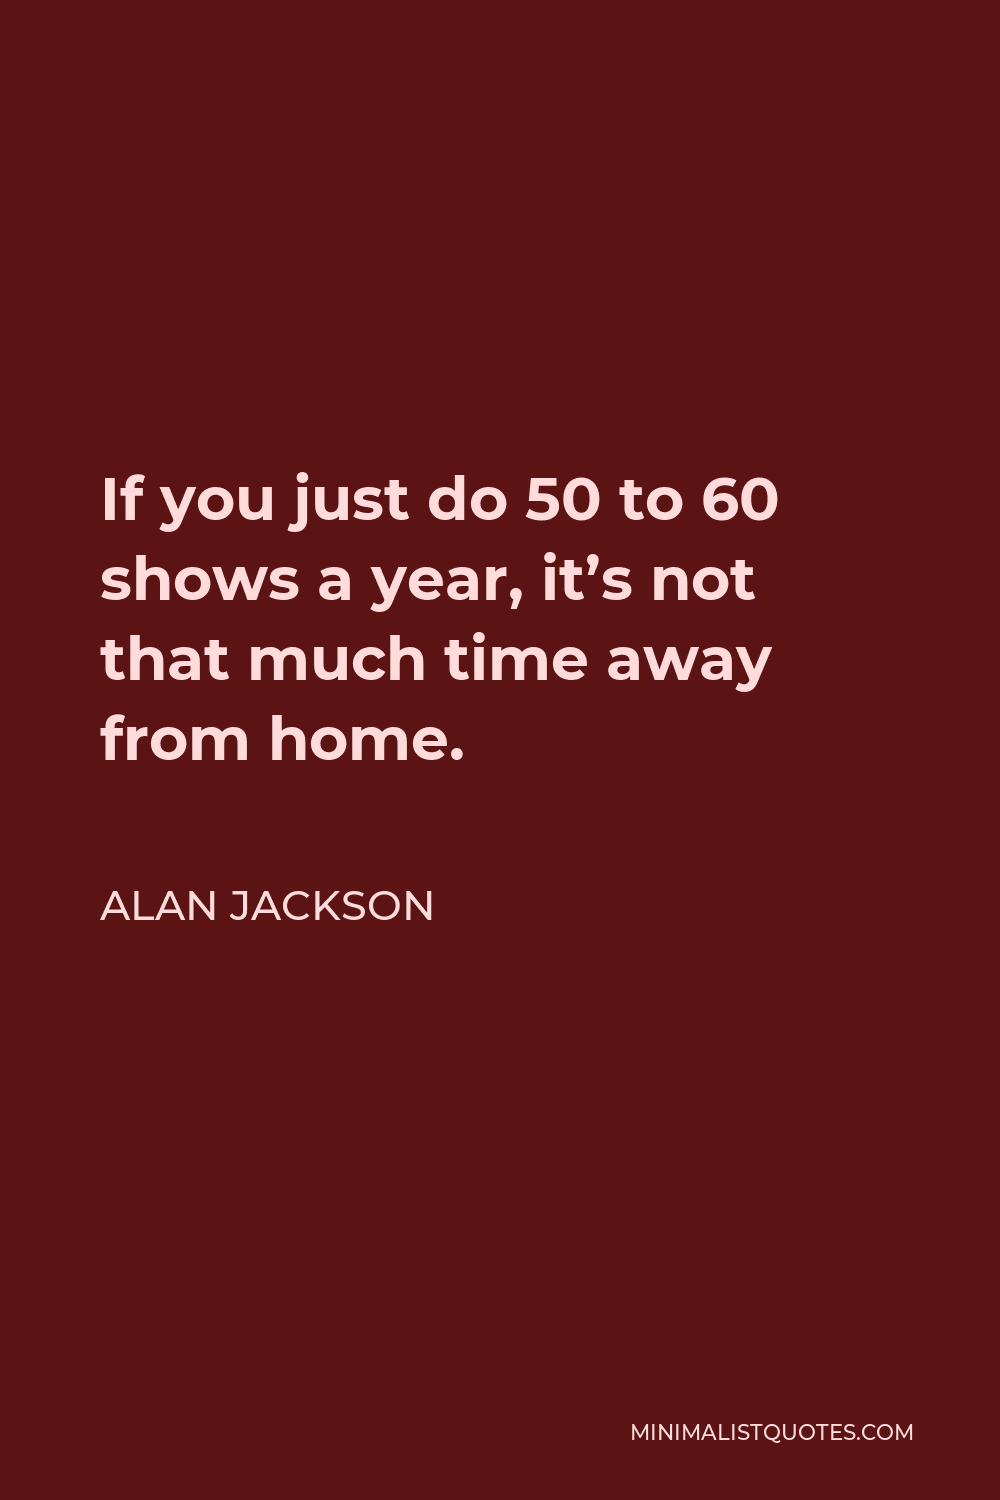 Alan Jackson Quote - If you just do 50 to 60 shows a year, it’s not that much time away from home.